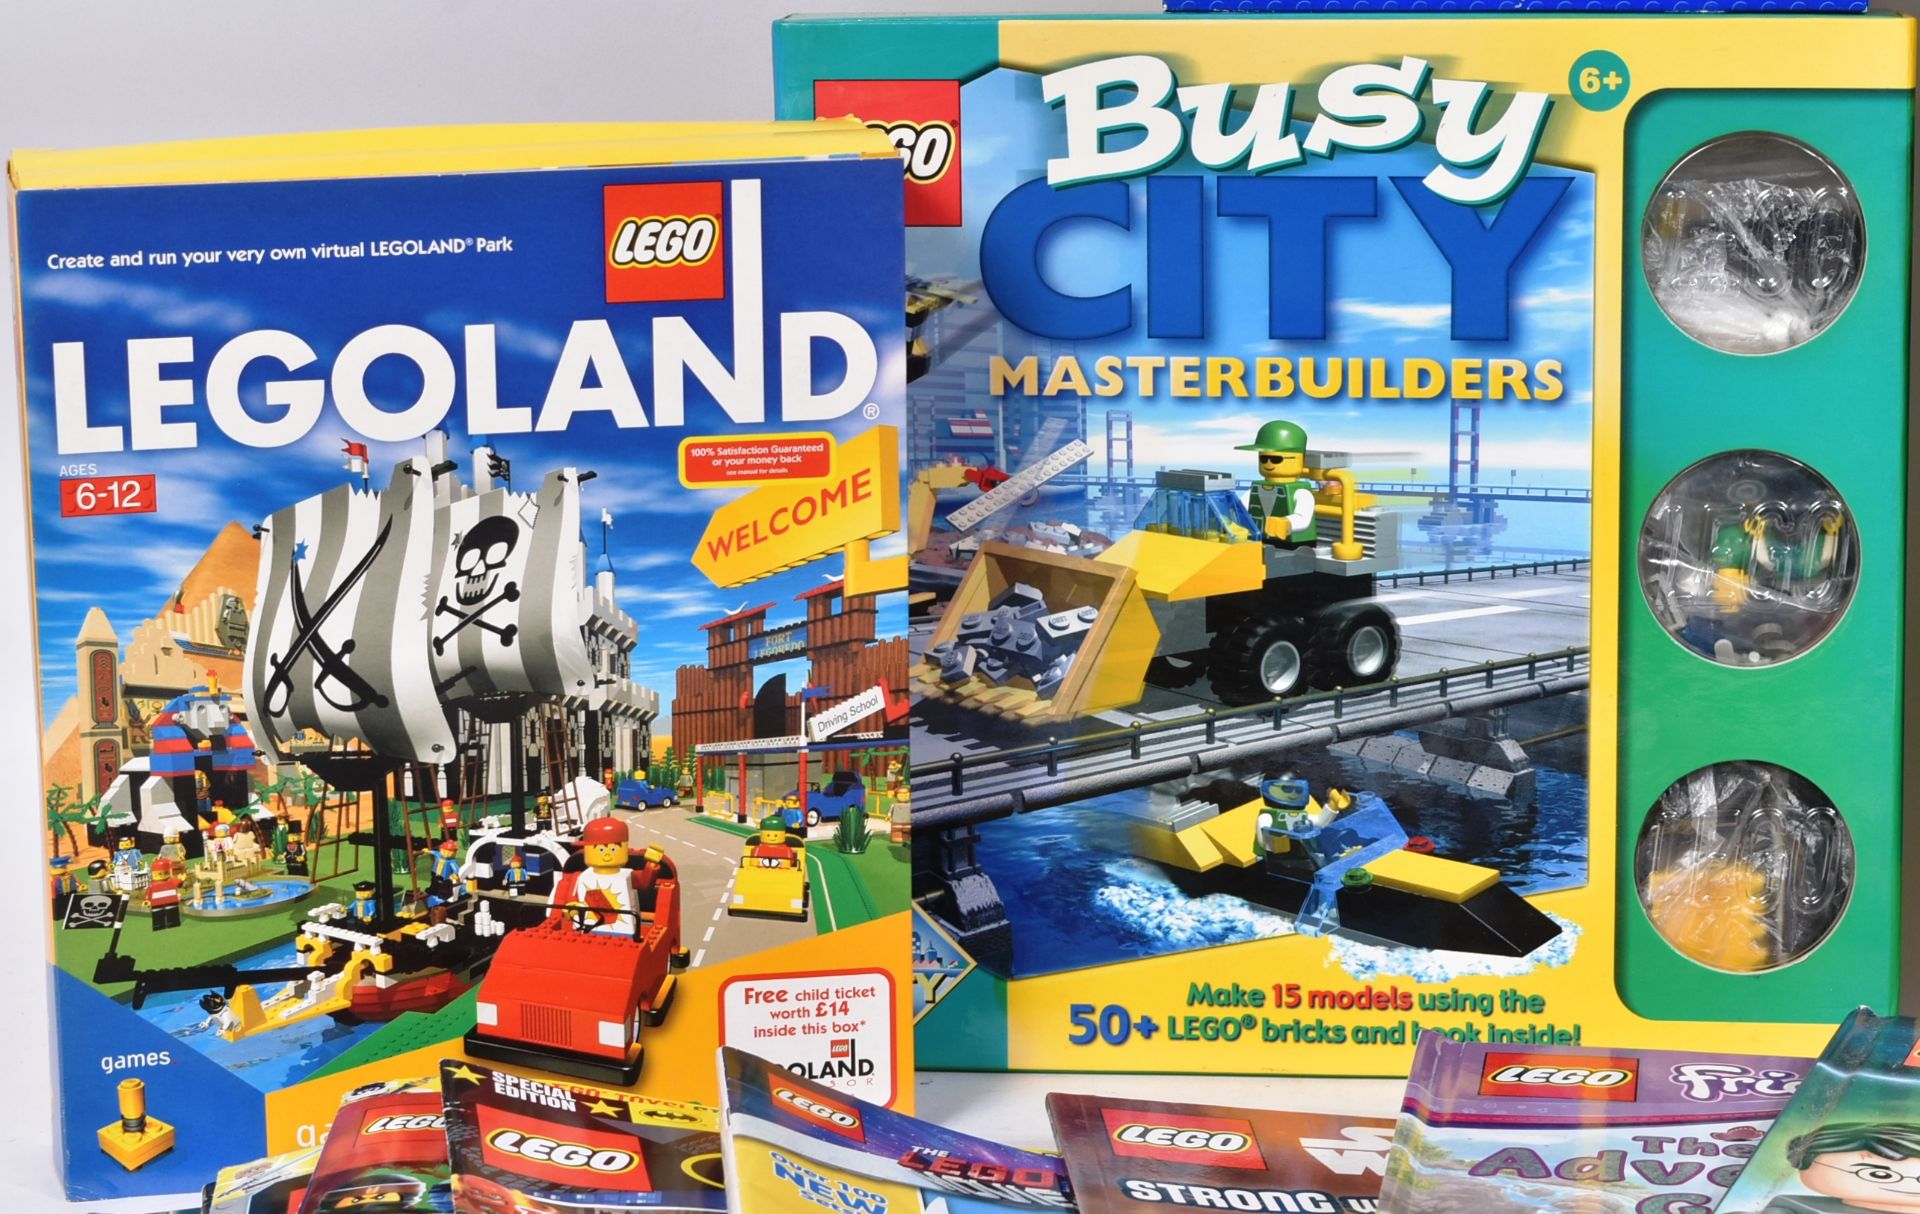 LEGO - COLLECTION OF LEGO SETS, MINIFIGURES & BOOKS - Image 4 of 6